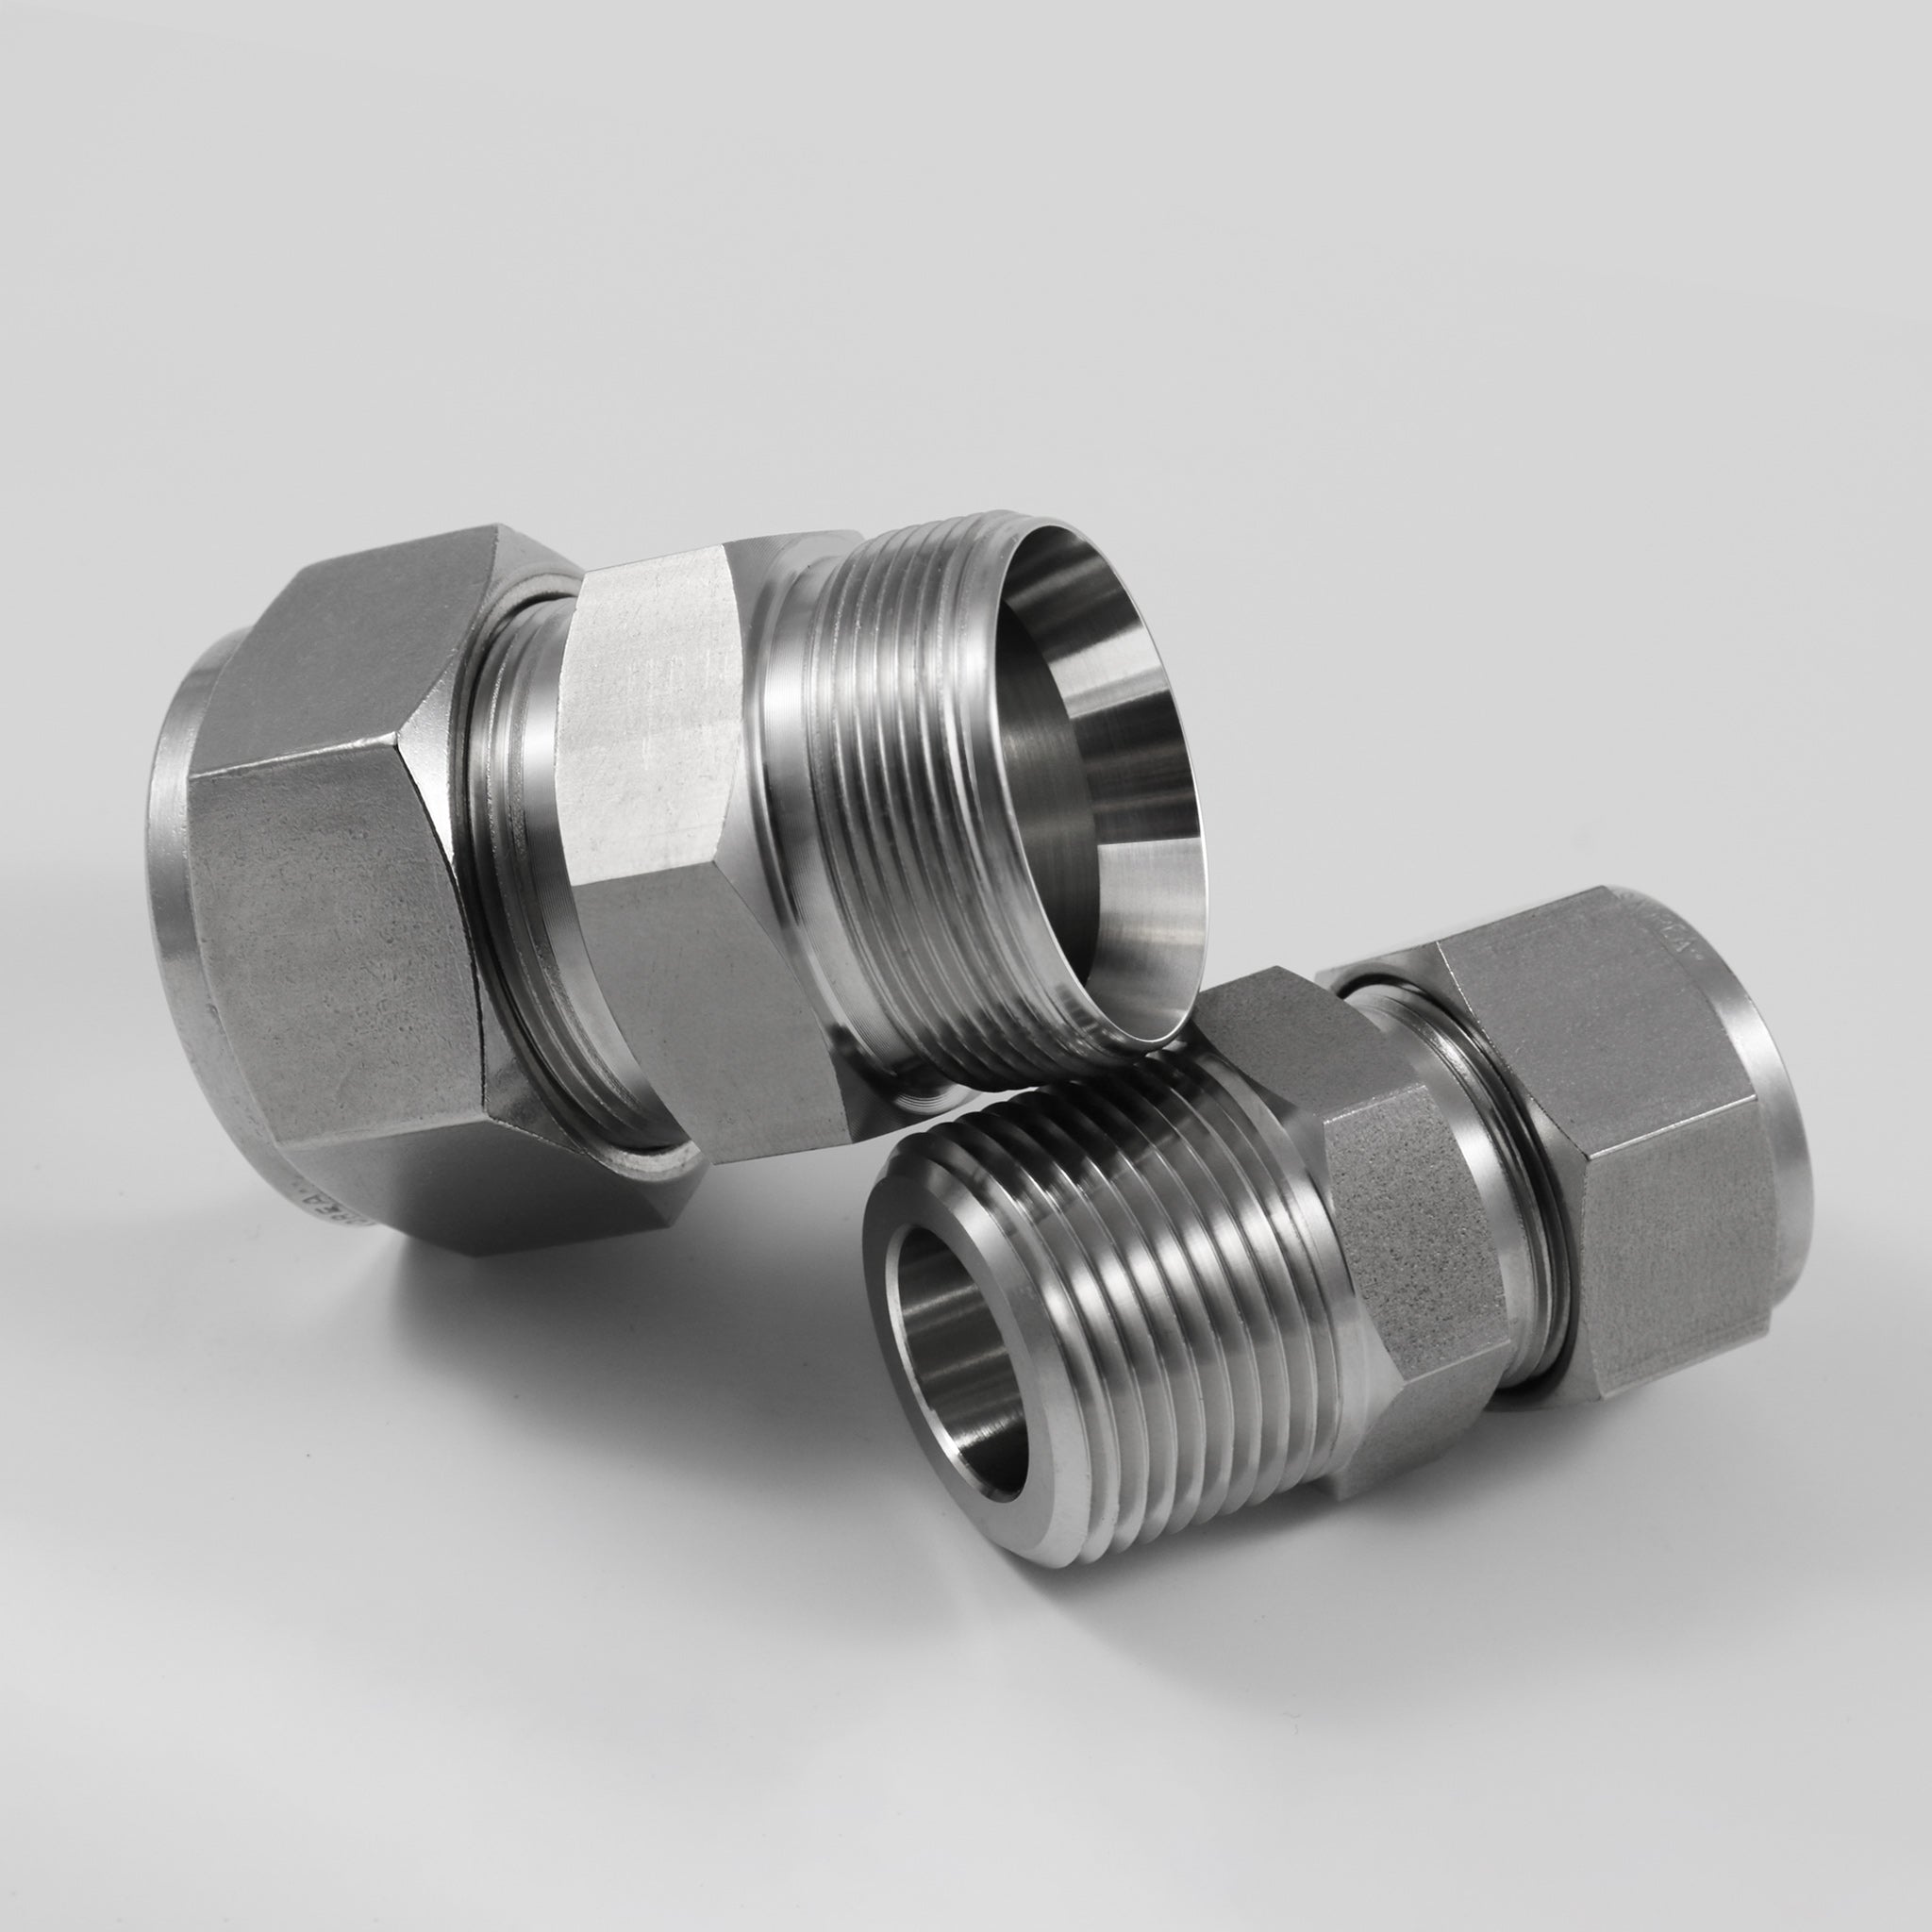 Common Applications for Tube Fittings